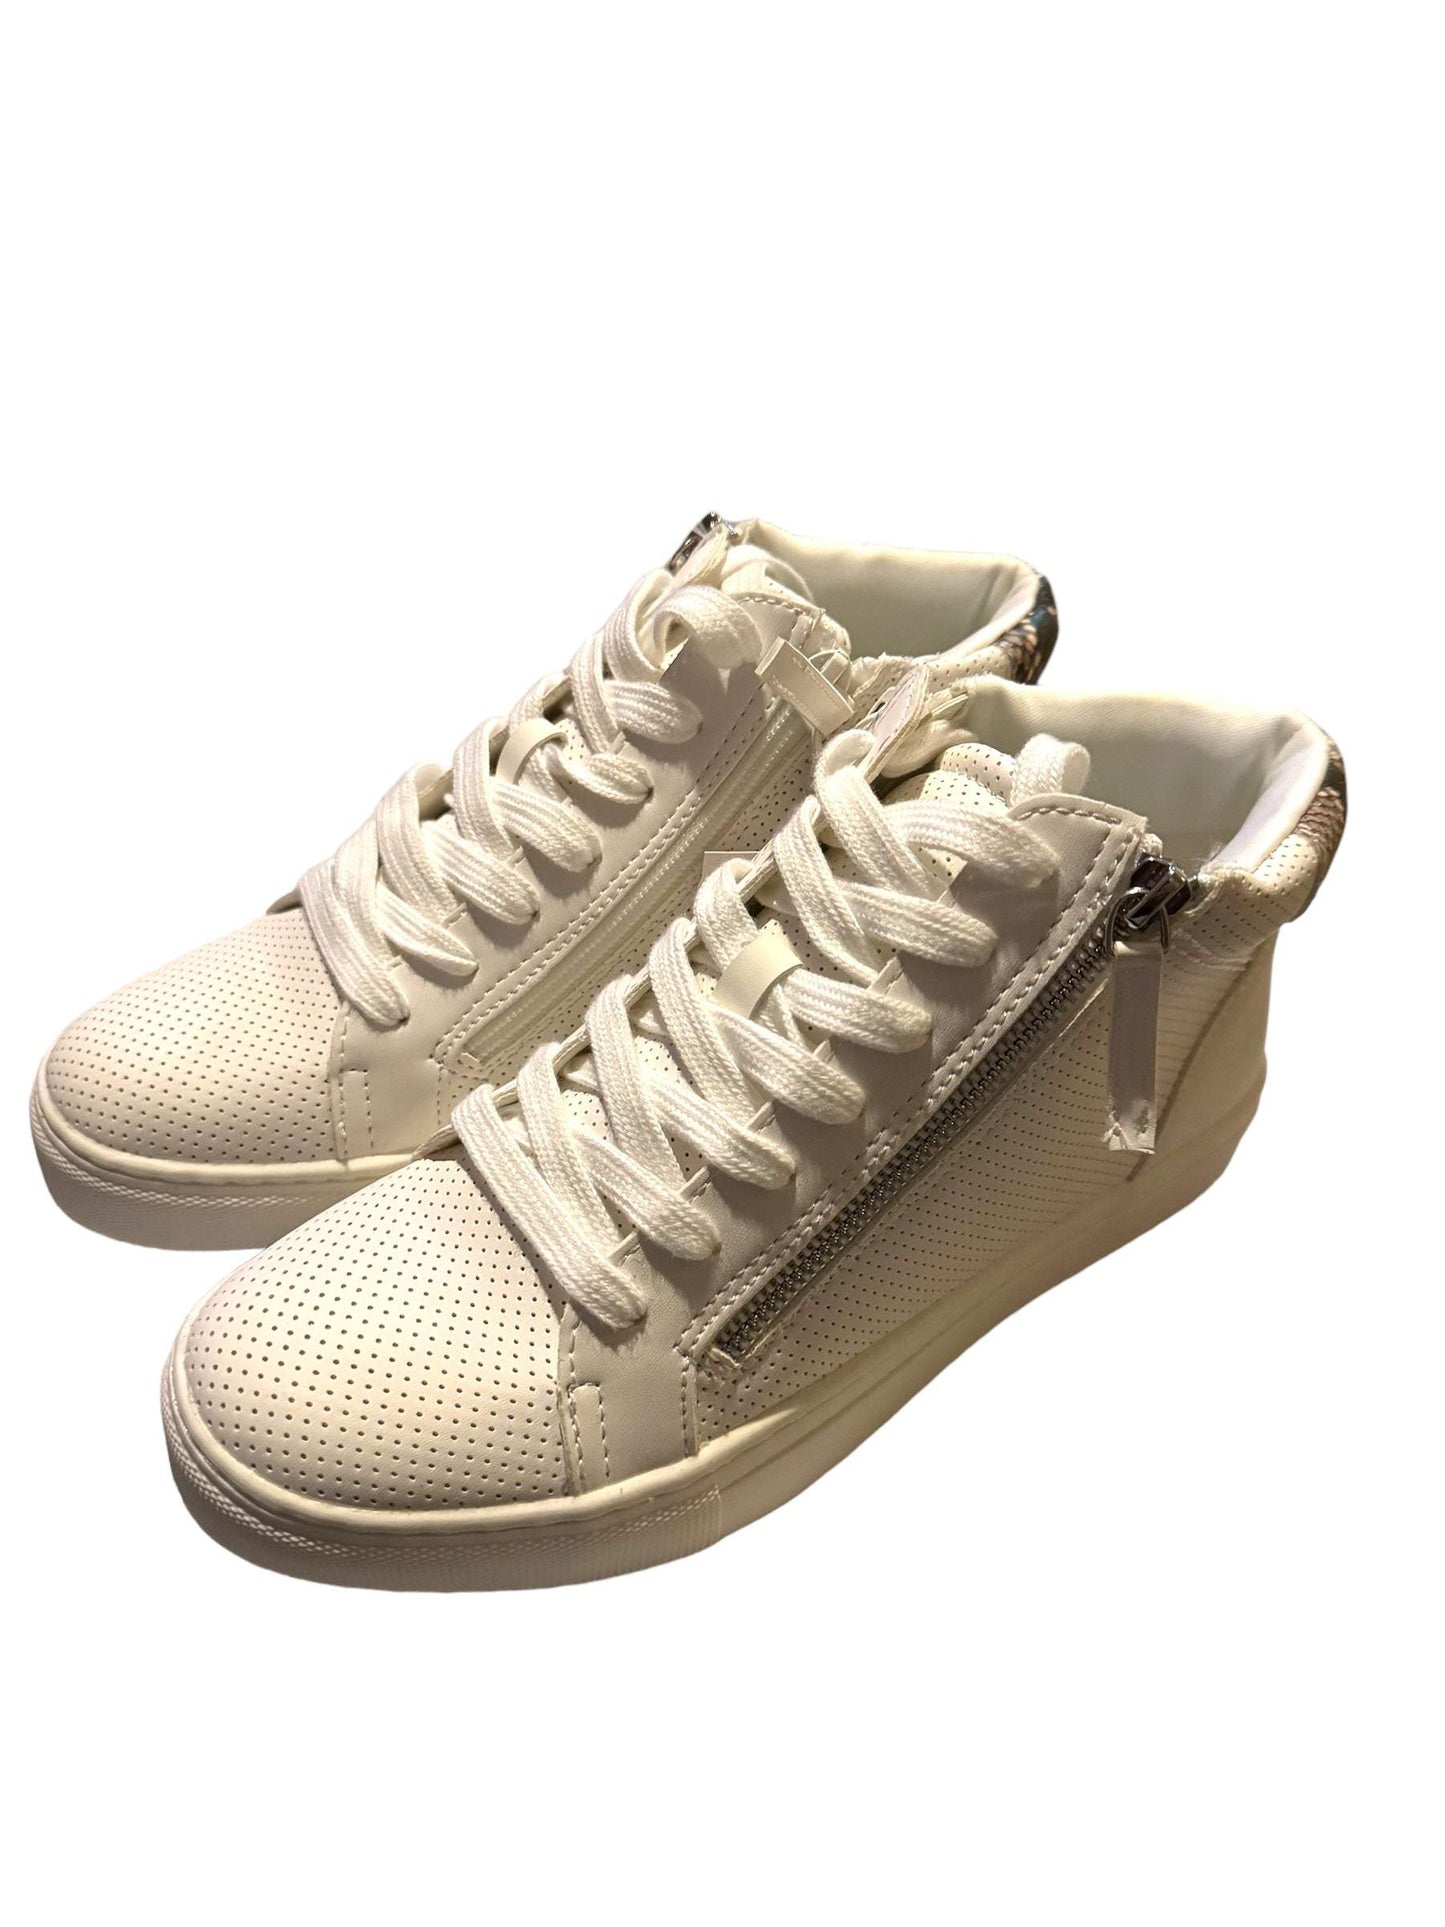 Universal Thread Brooklyn Lace Up Sneakers NEW Size 8.5 White - Selzalot